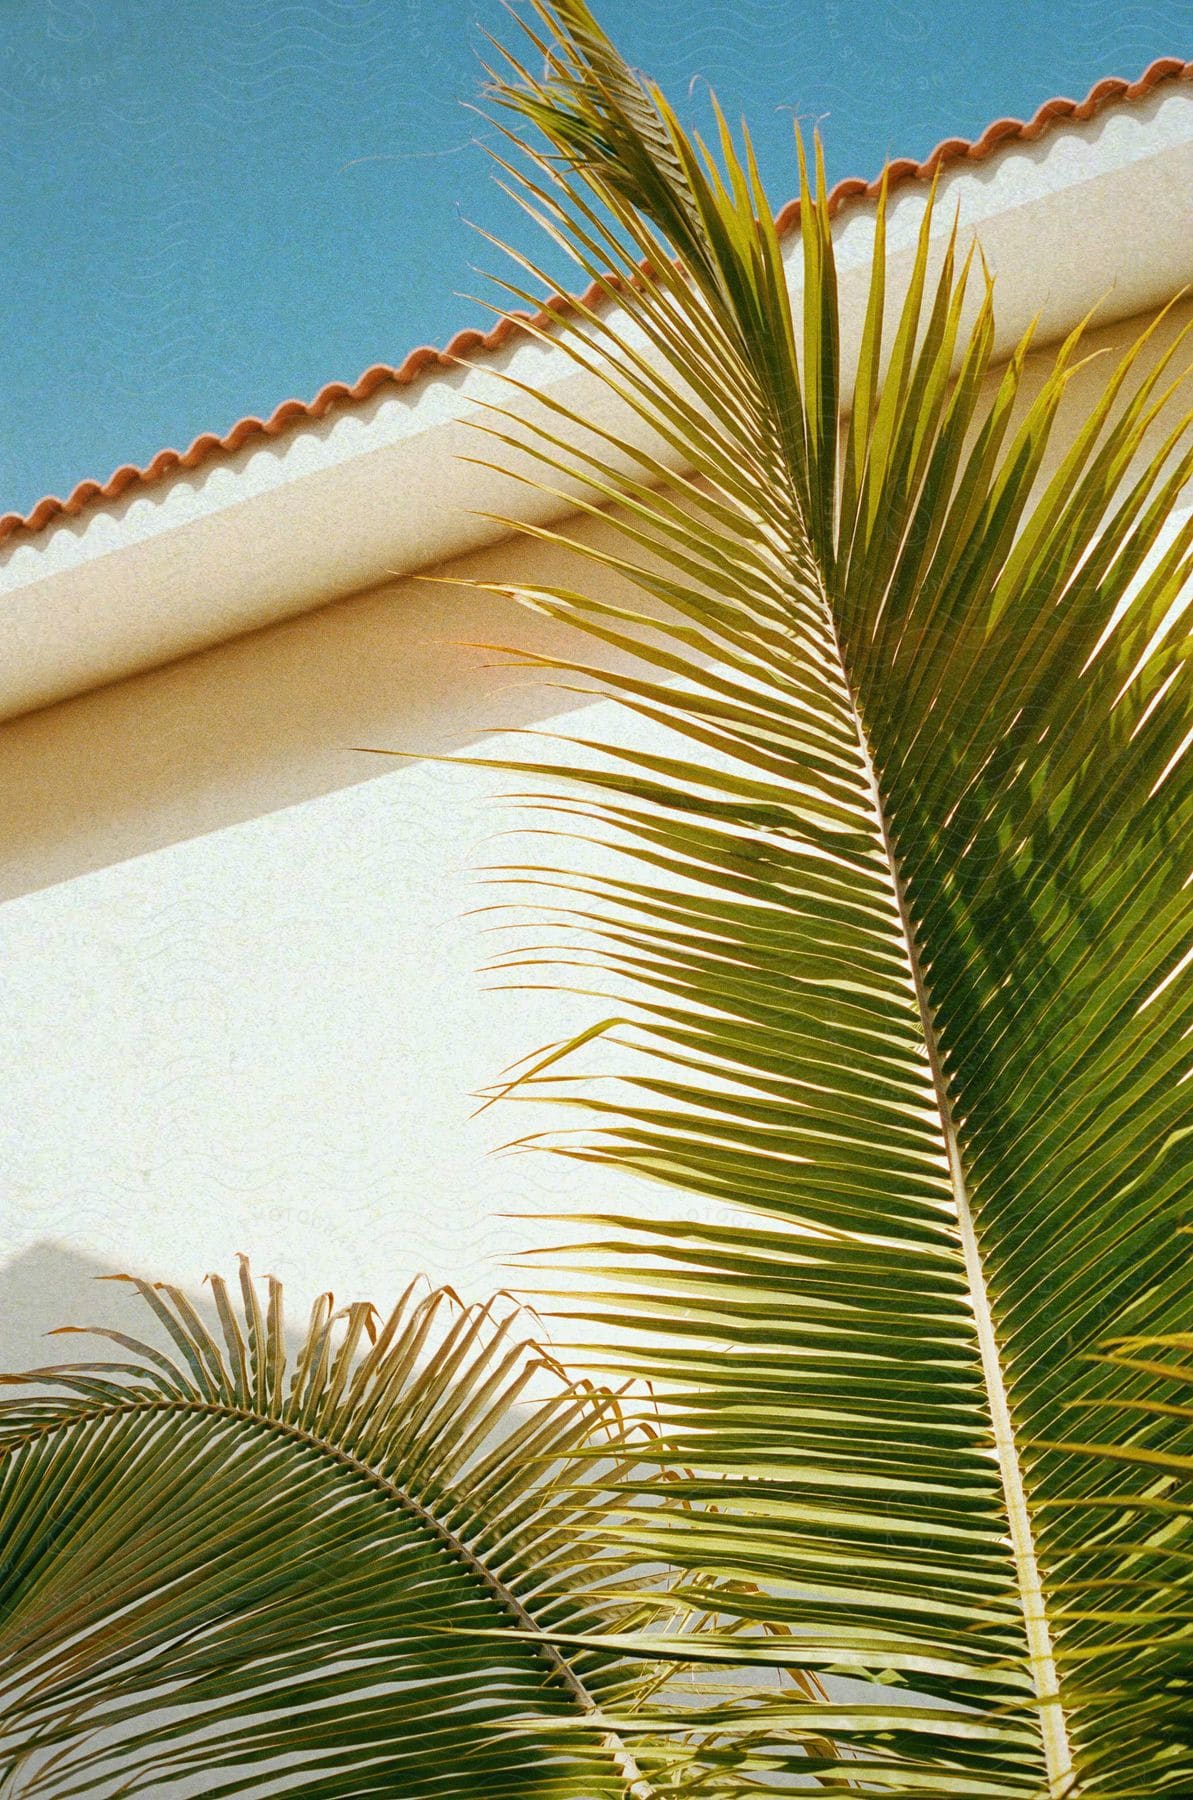 Palm leaves in the foreground with a blue sky and the edge of a traditional roof and a white wall.